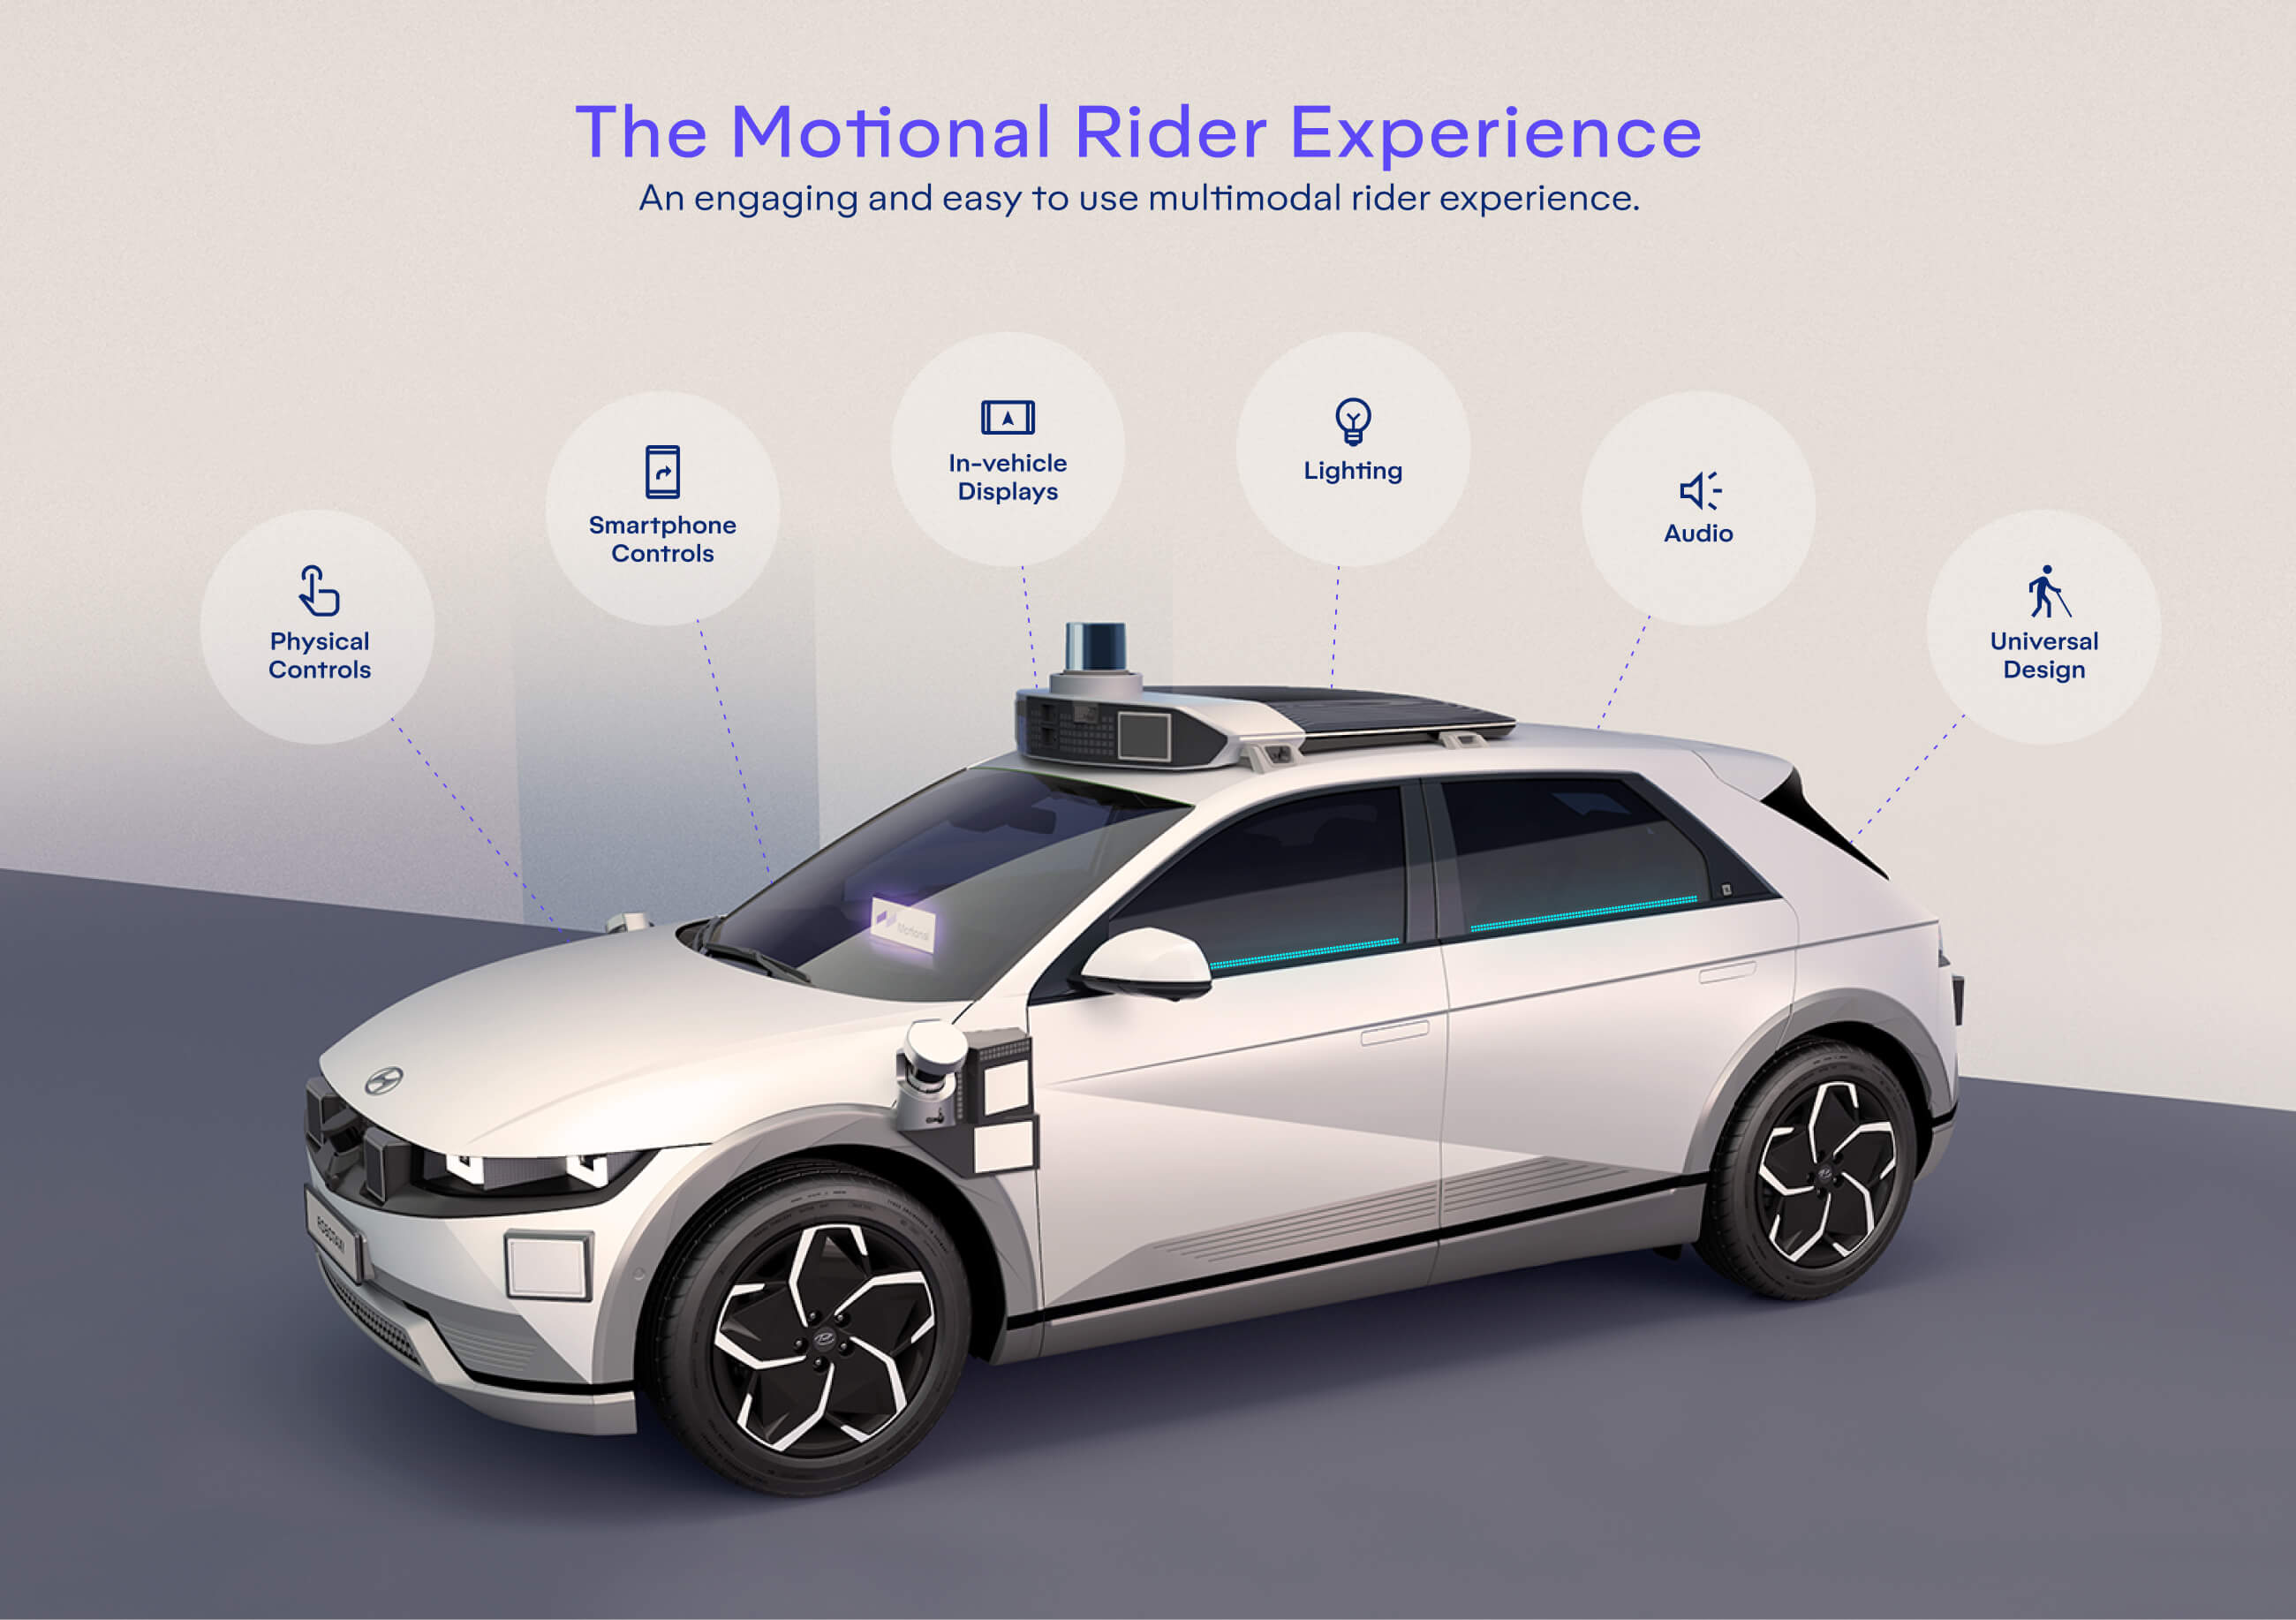 Motional Rider Experience Overview